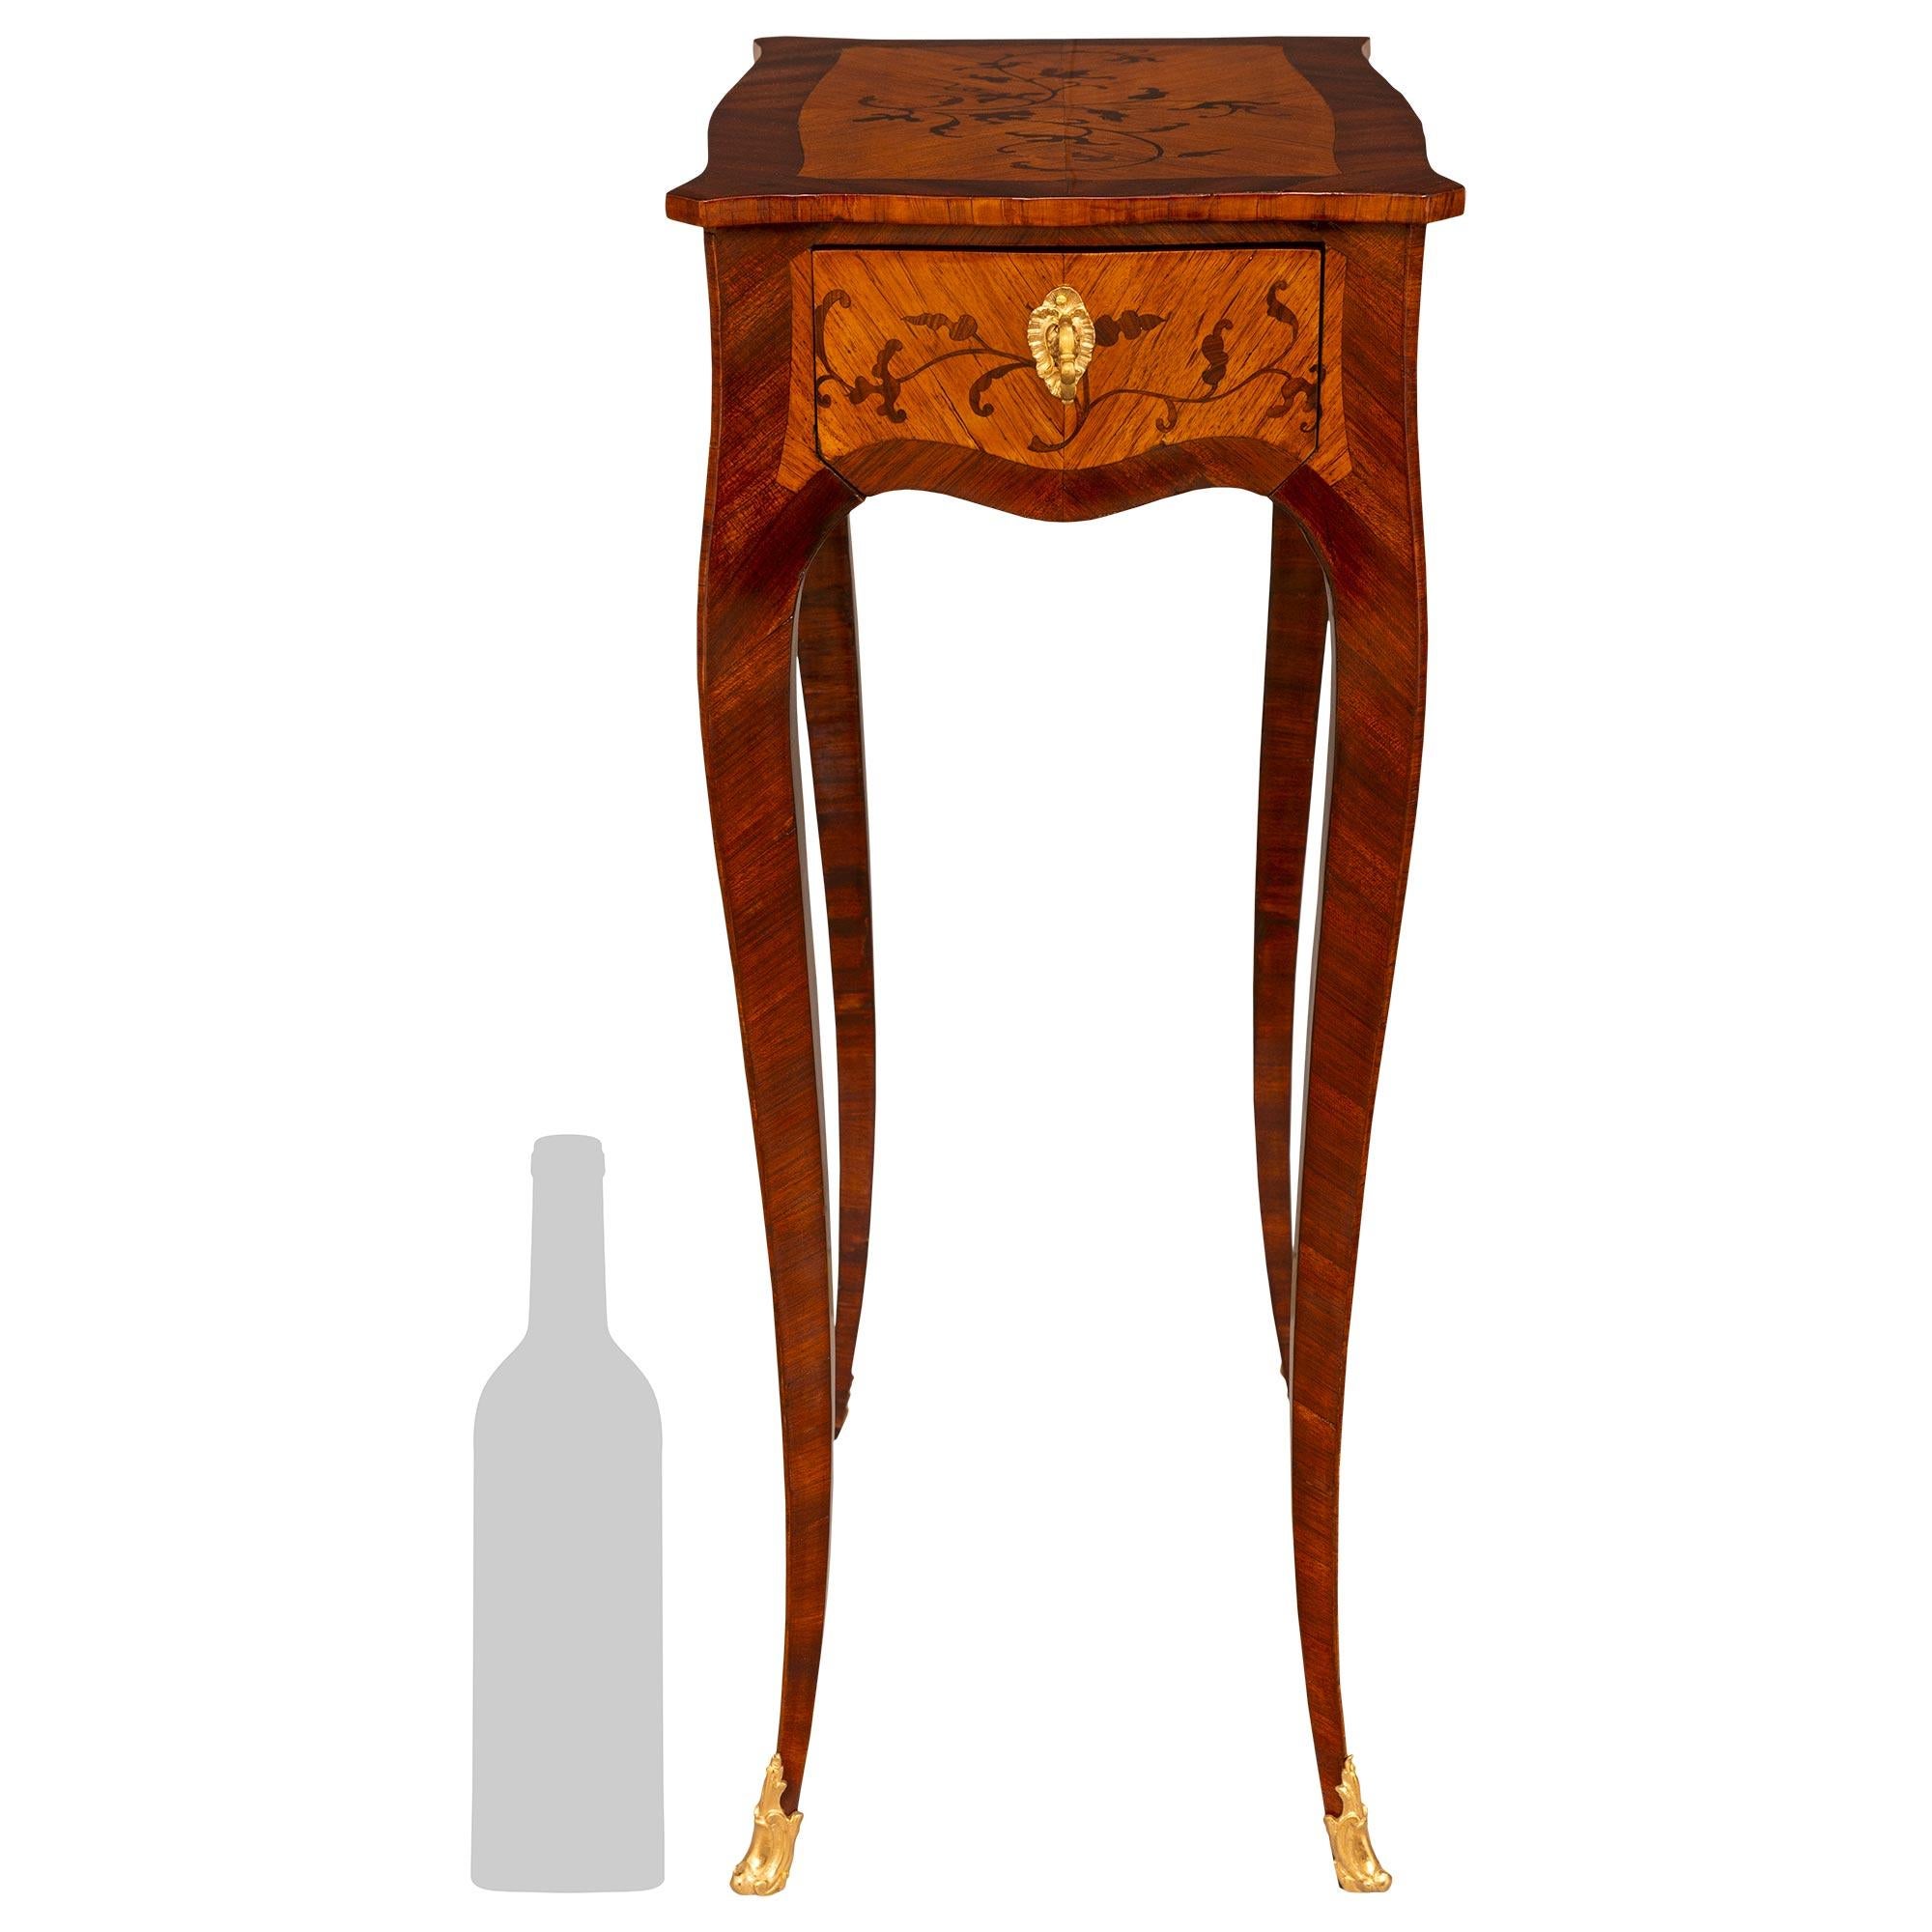 A charming French 19th century Louis XV st. Kingwood, Tulipwood and Ormolu side table.